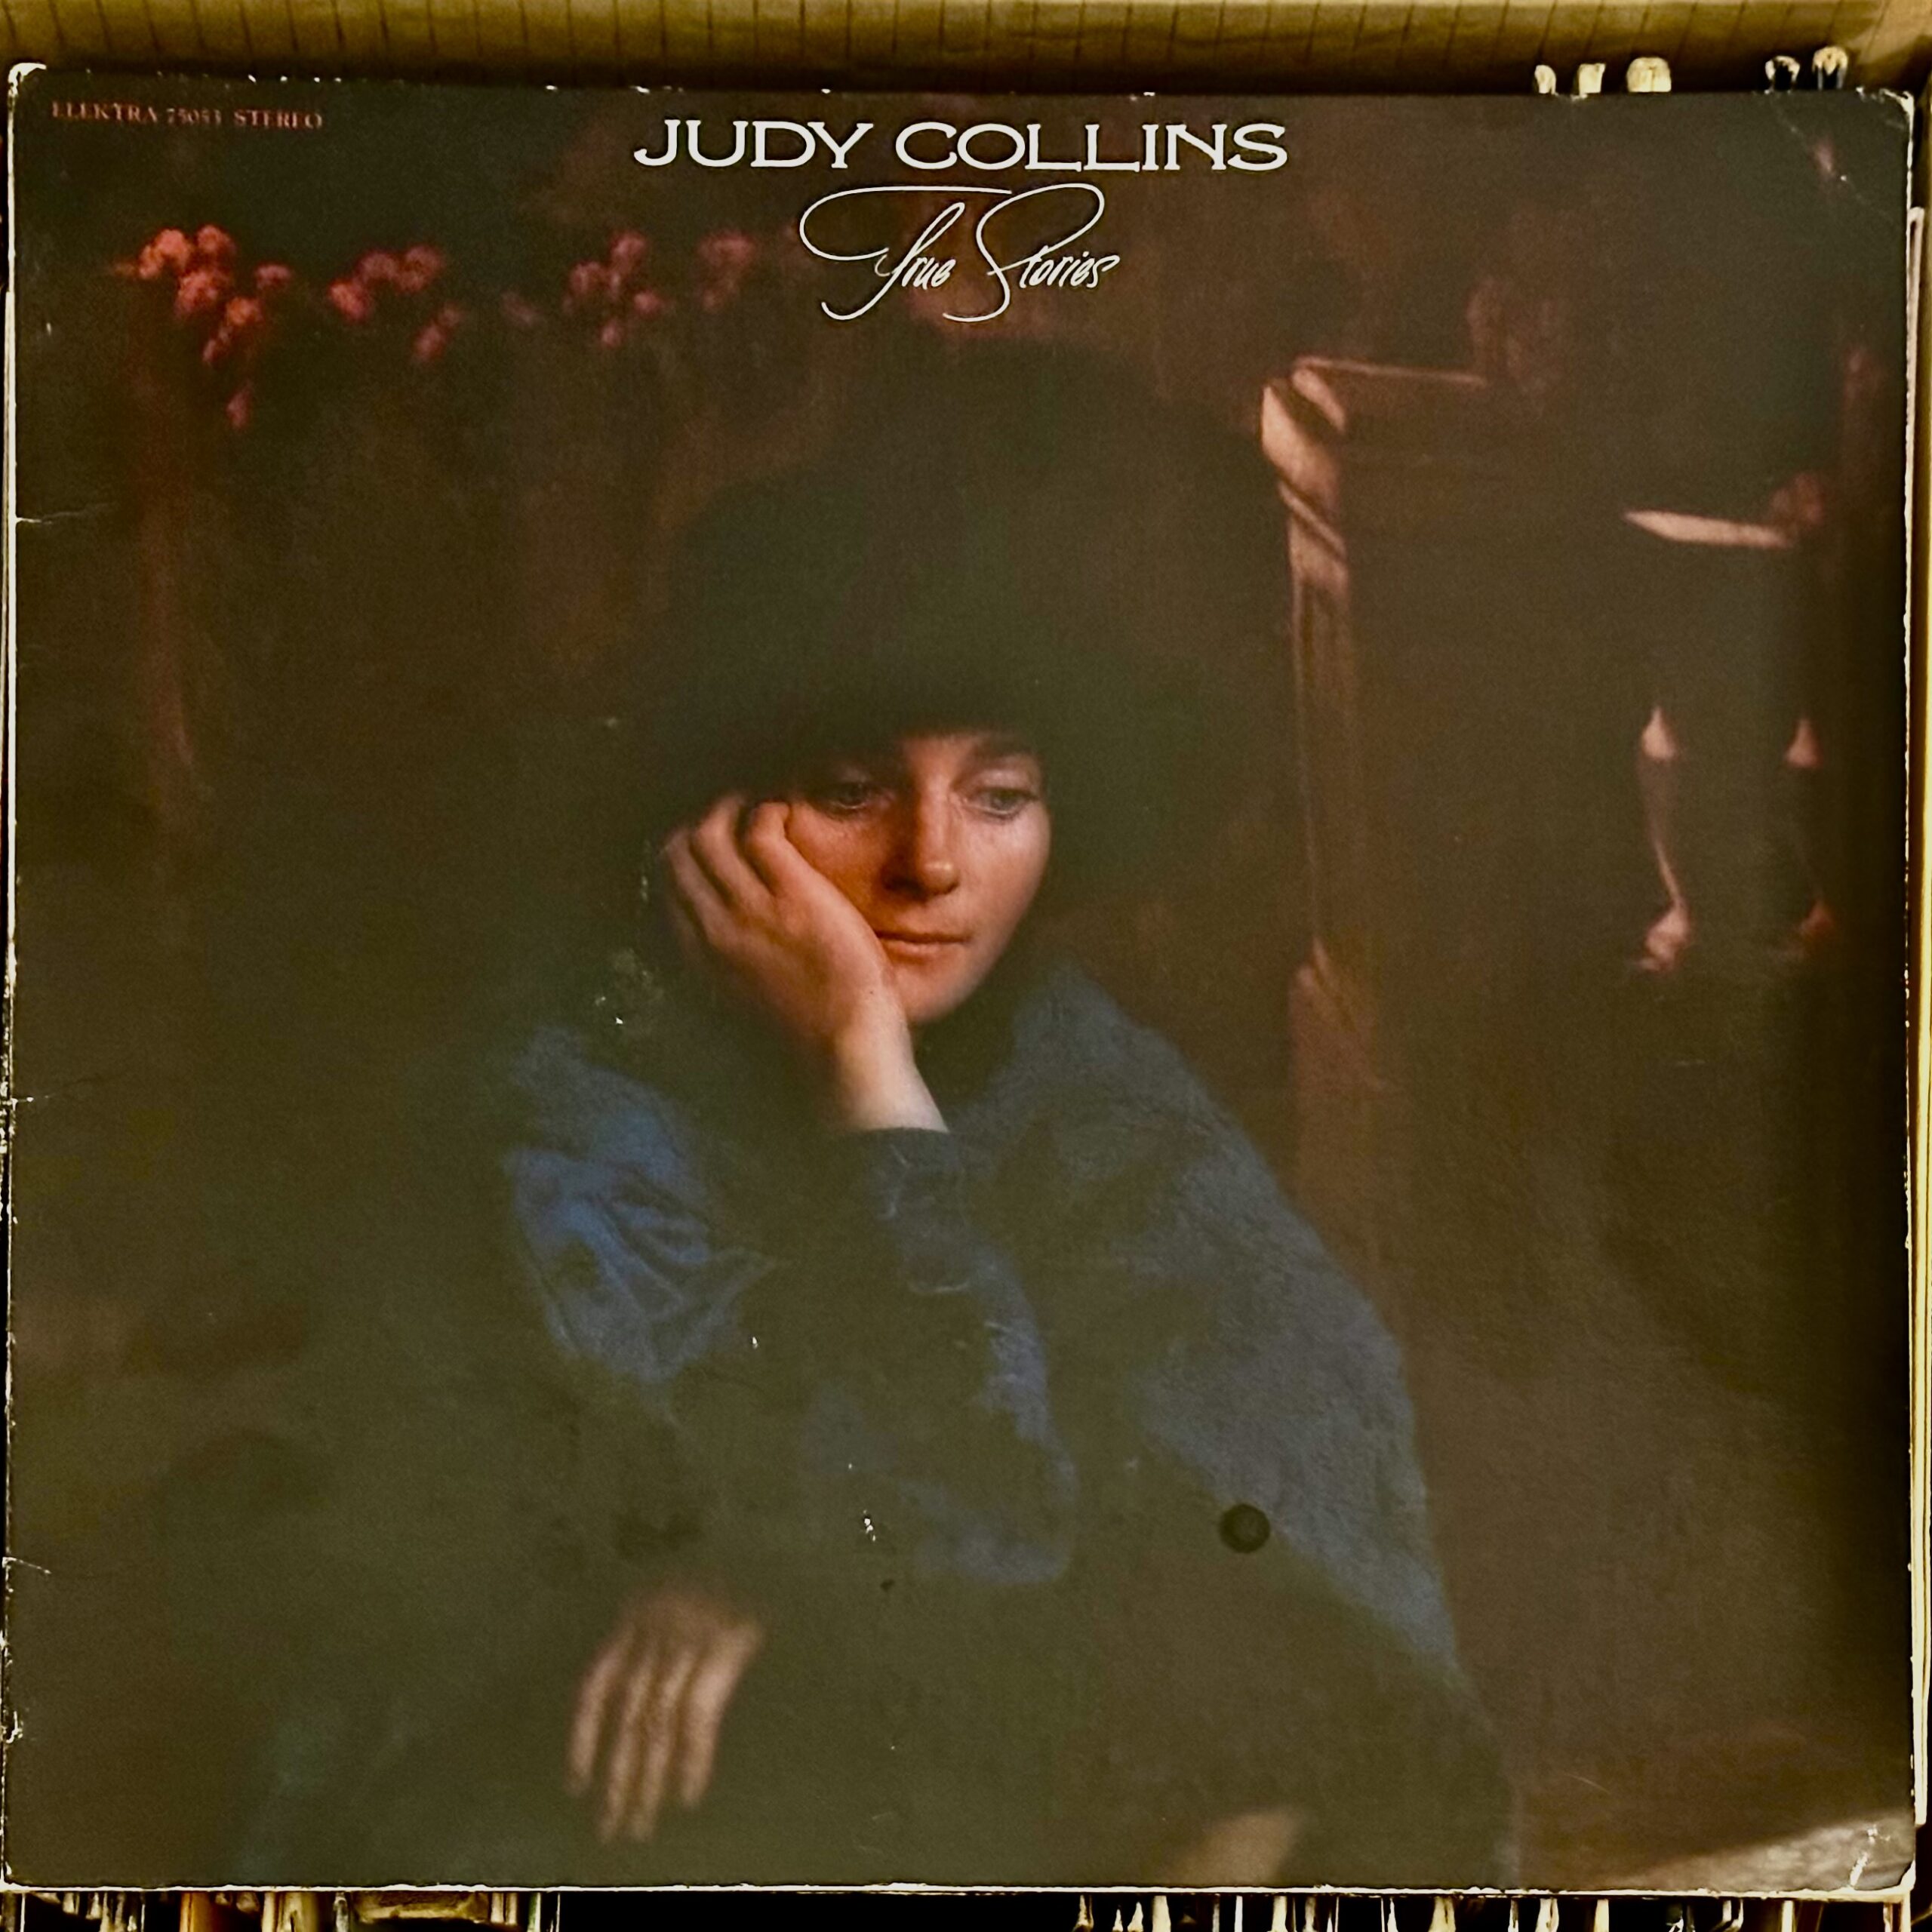 True Stories and Other Dreams by Judy Collins